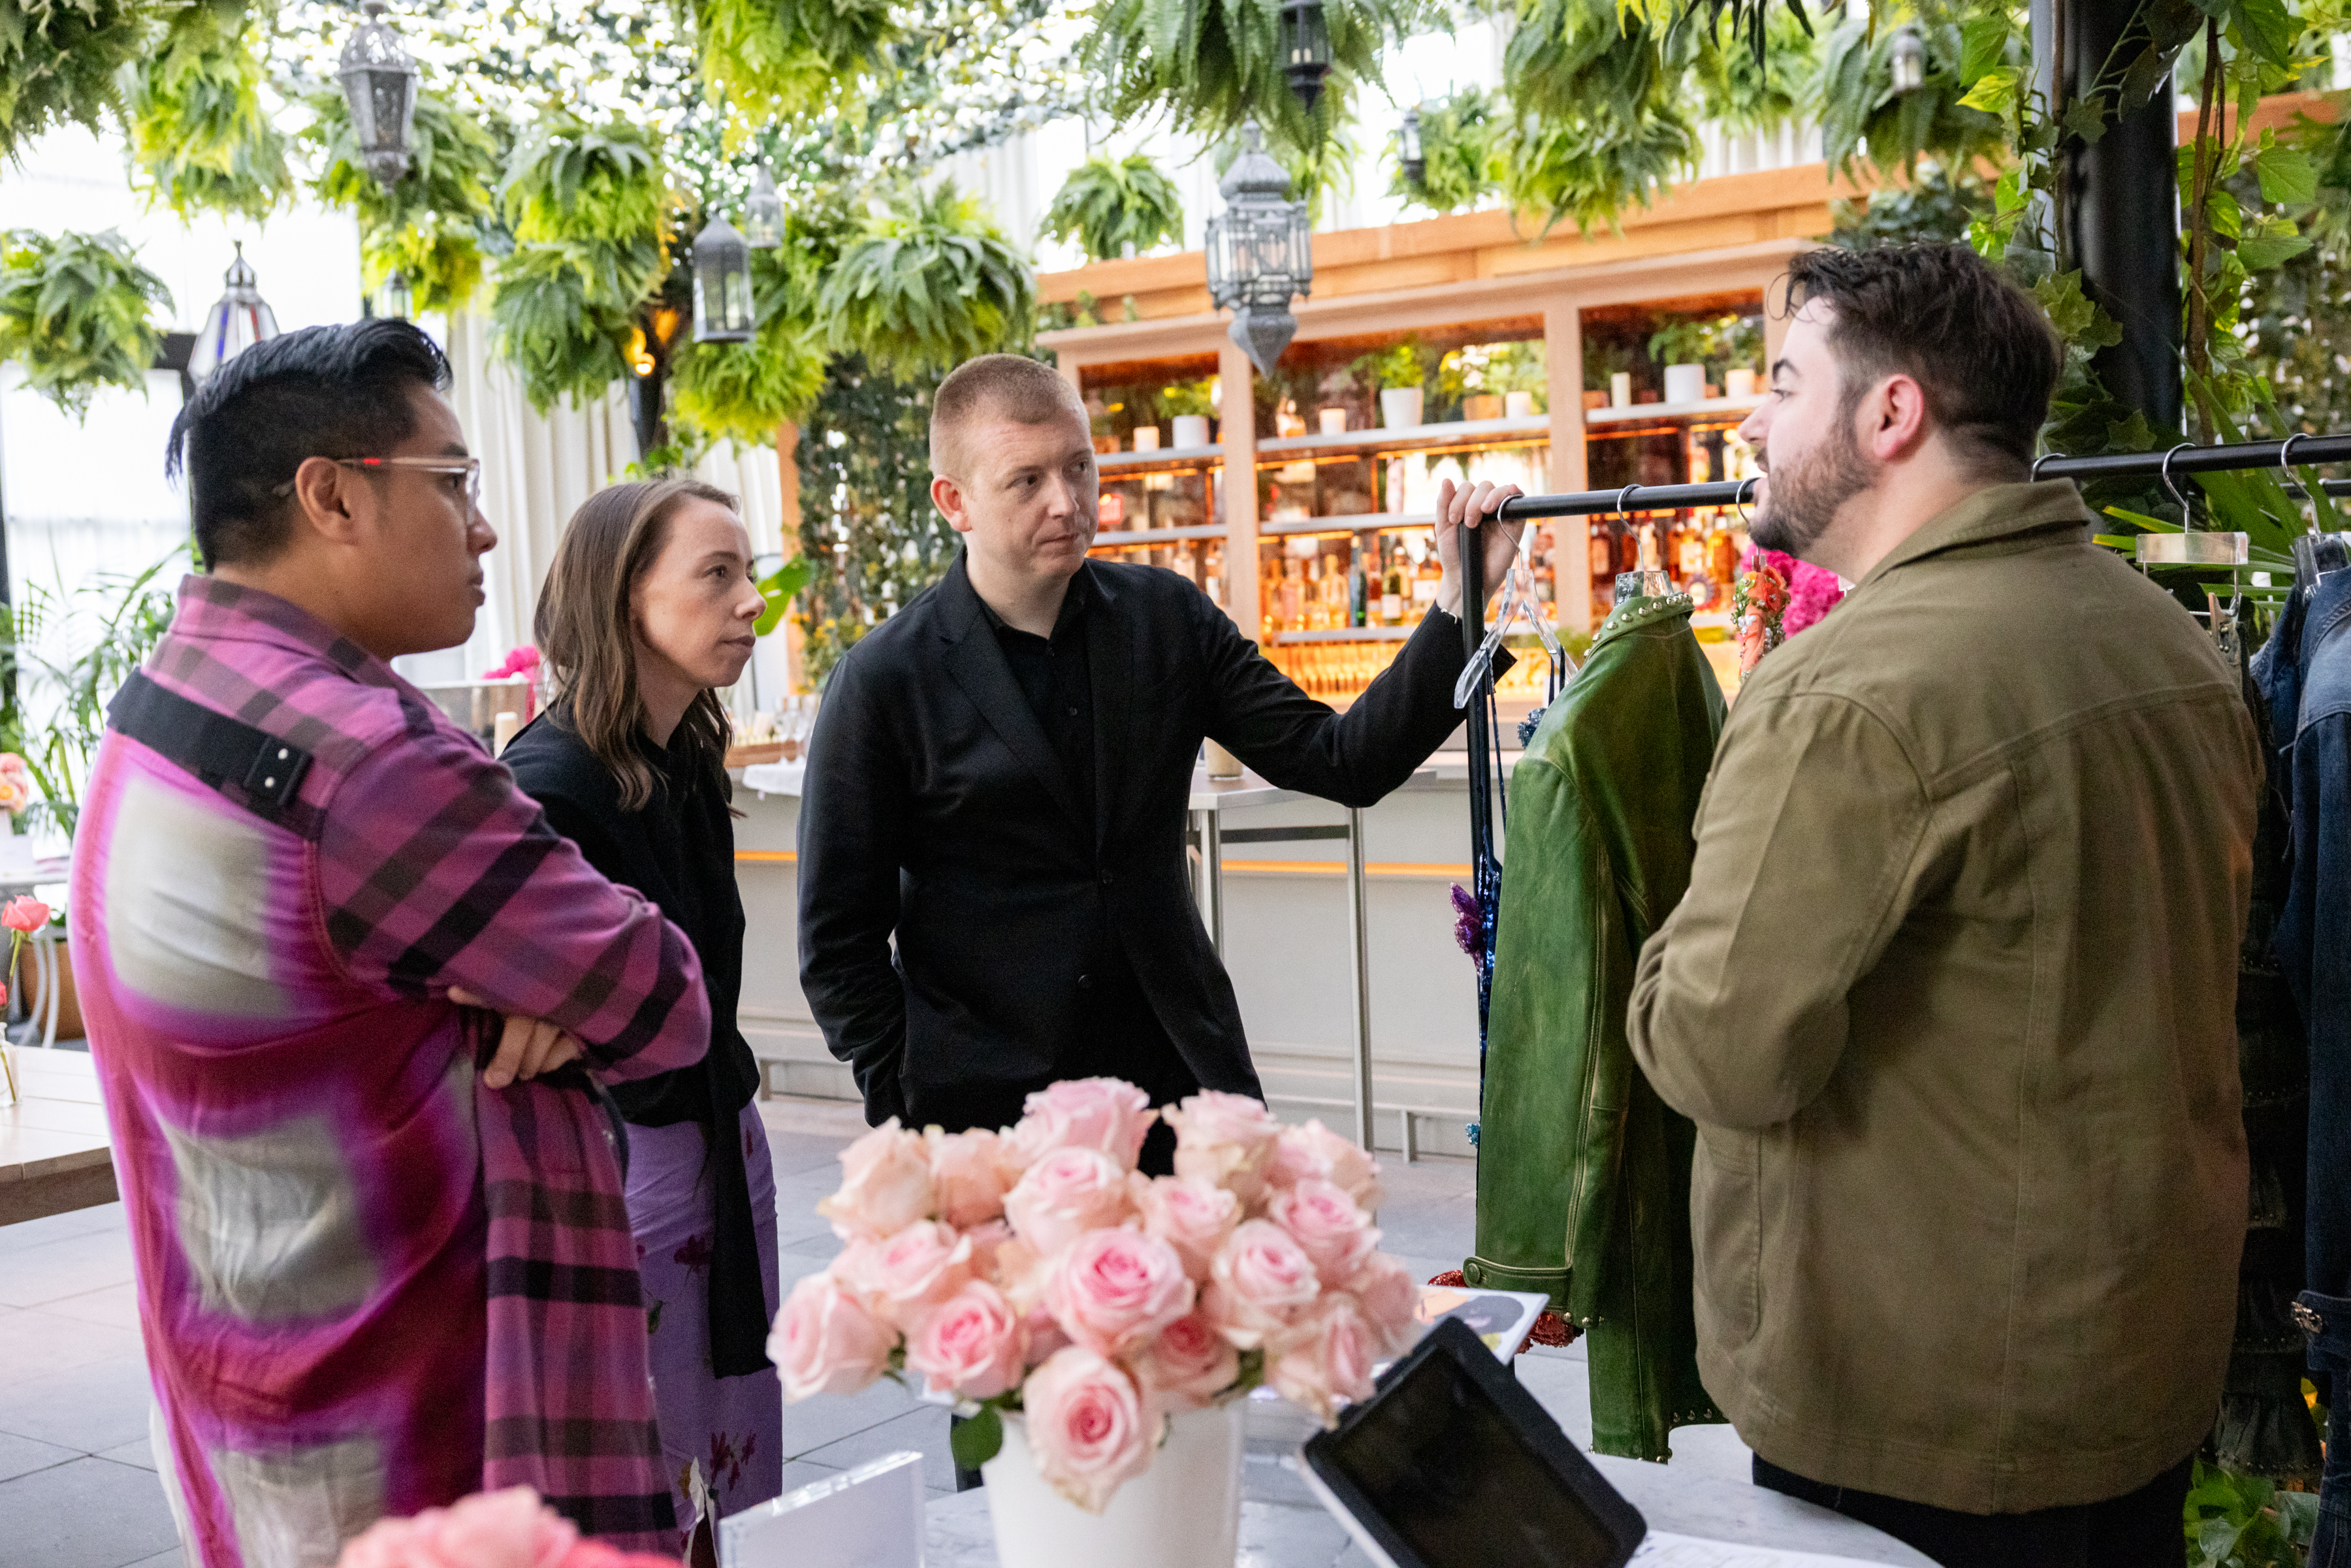 Nordstrom Celebrated the 2021 CVFF Class With a Cocktail Party